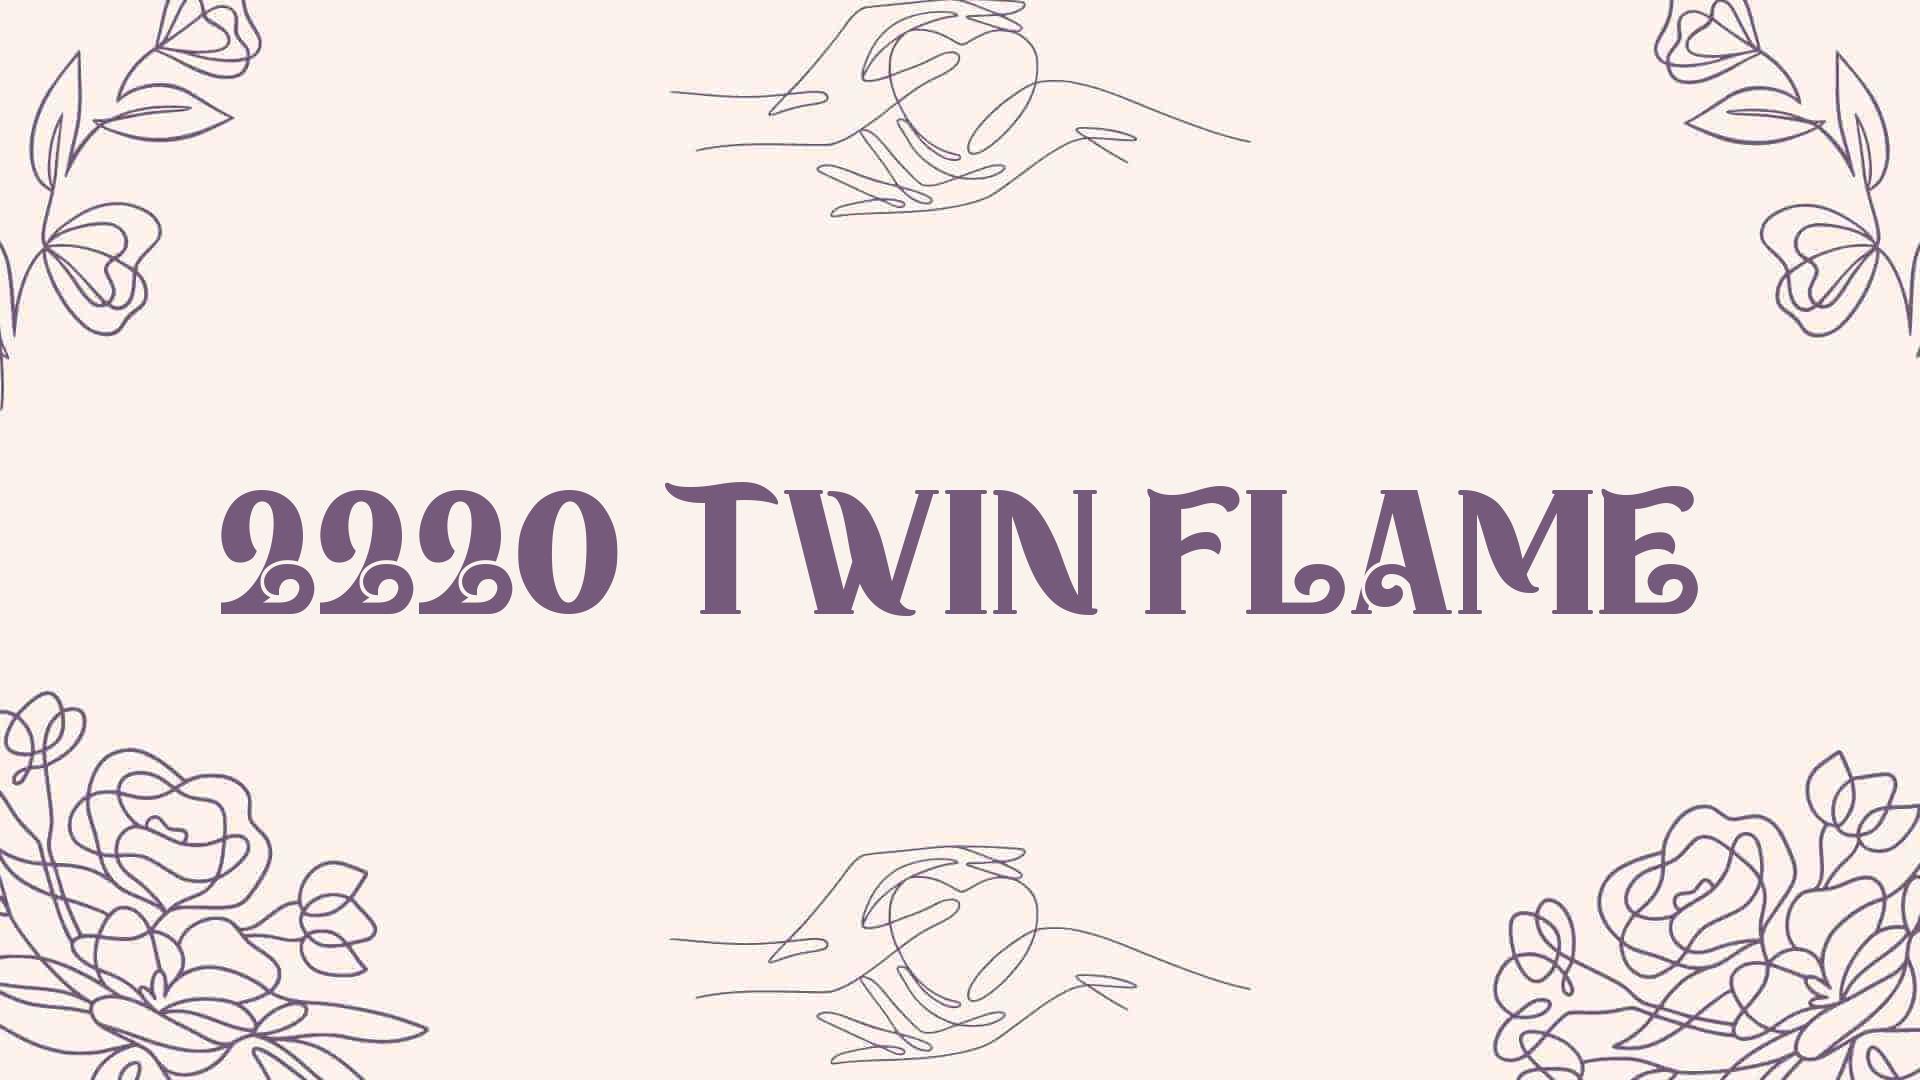 2220 twin flame [ Meaning Revealed ]